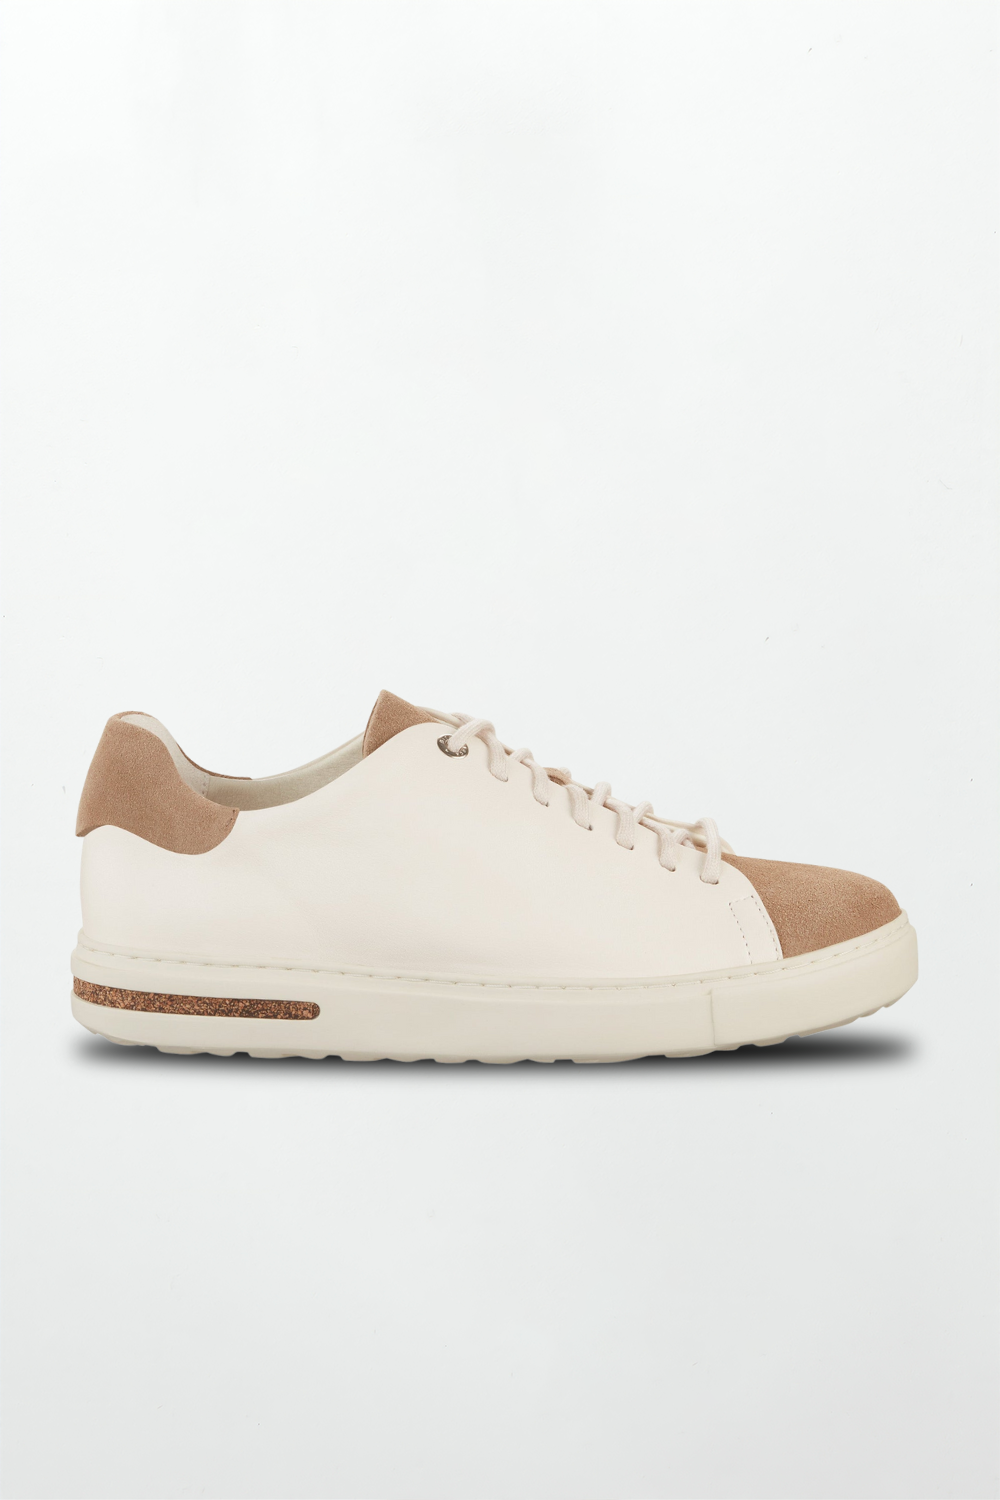 Bend Low Nubuck/Natural Leather in Grey Taupe/Eggshell Natural